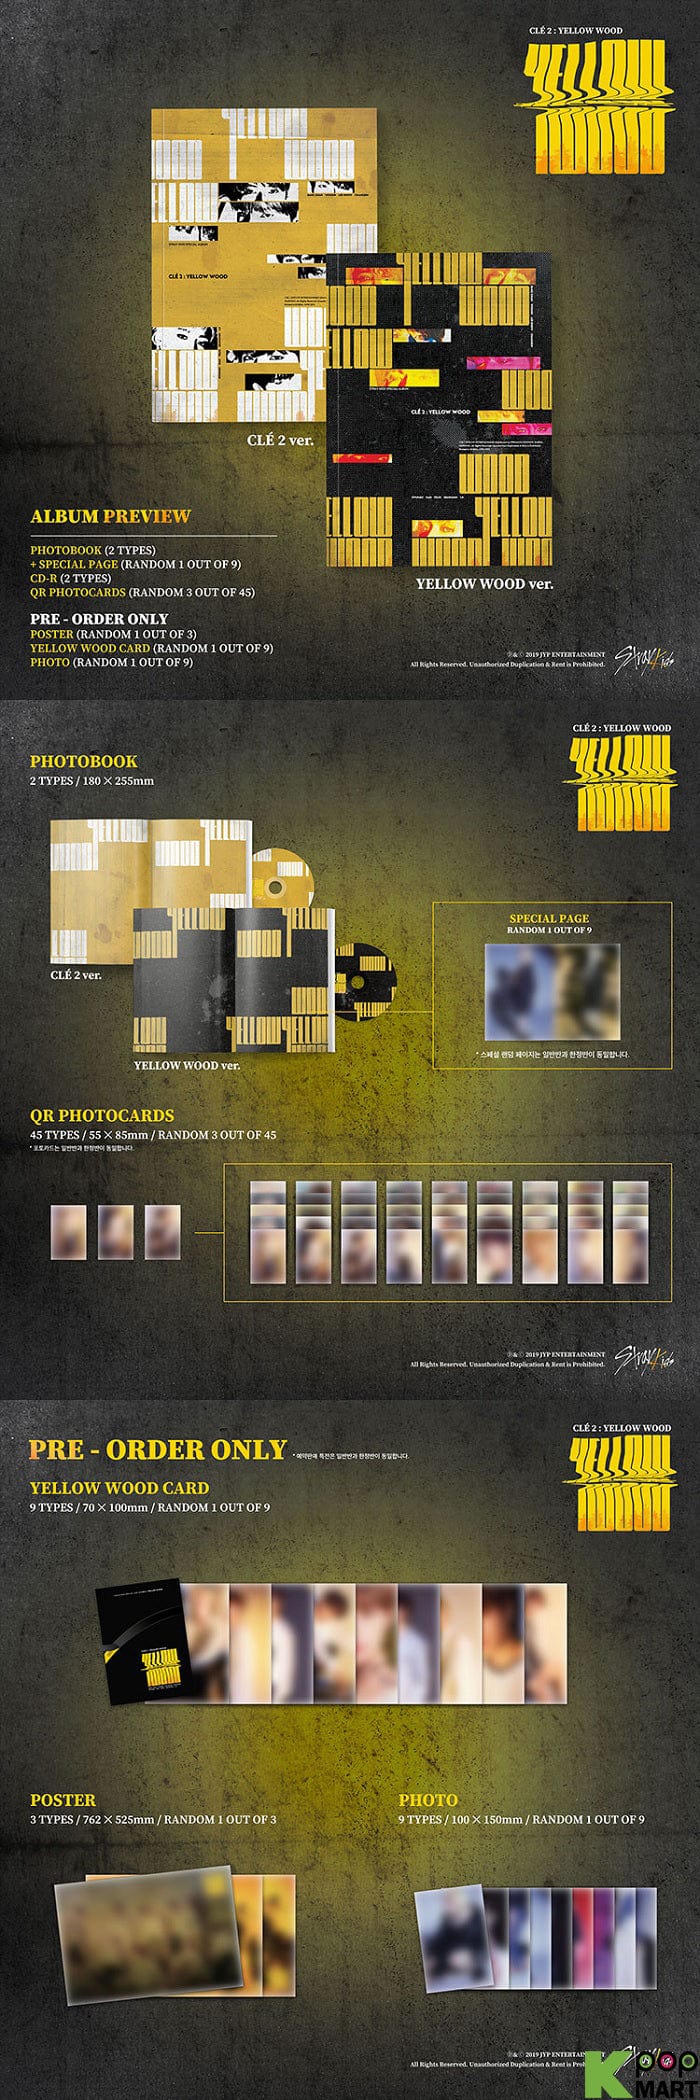 Korea Pop Store STRAY KIDS - CLE 2 : YELLOW WOOD (SPECIAL ALBUM) NORMAL VERSION Kawaii Gifts 8809440338931